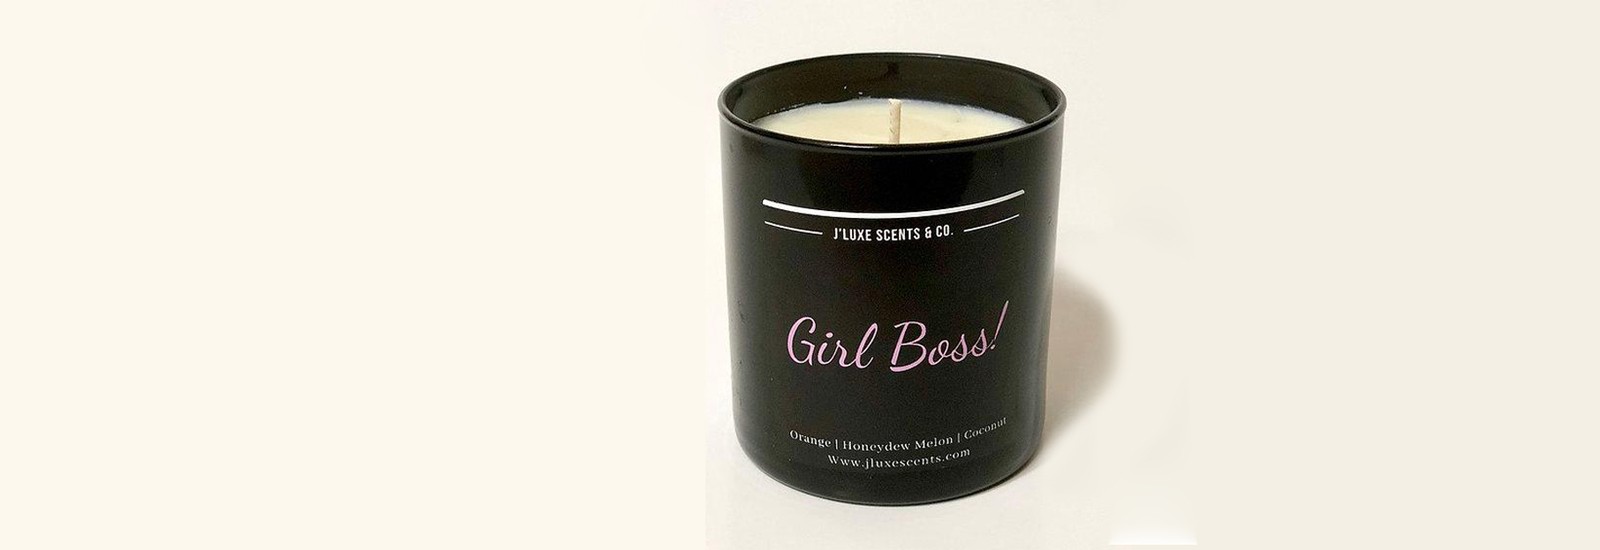 BlackOwnedBusiness J'LUXE SCENTS &CO Girl Boss